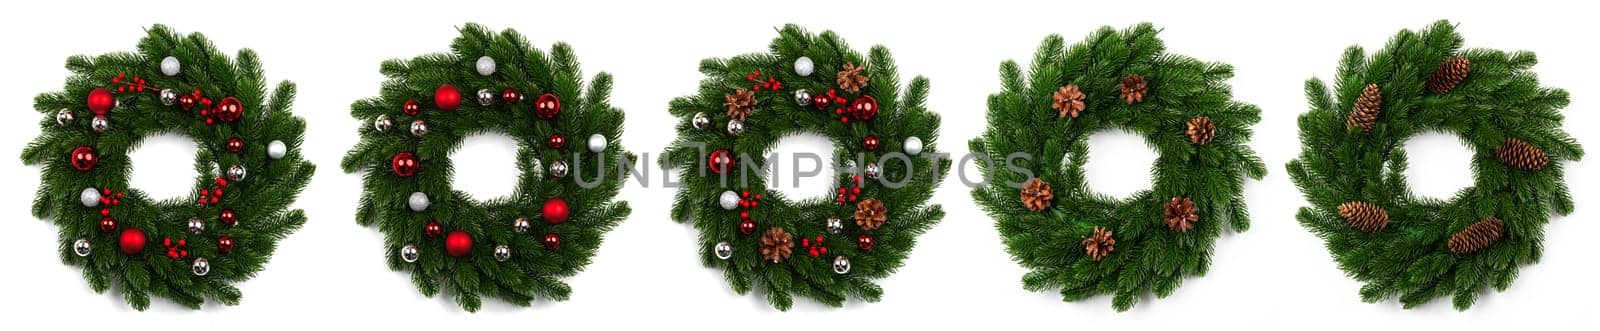 isolated christmas wreath and red silver balls on white by Yellowj